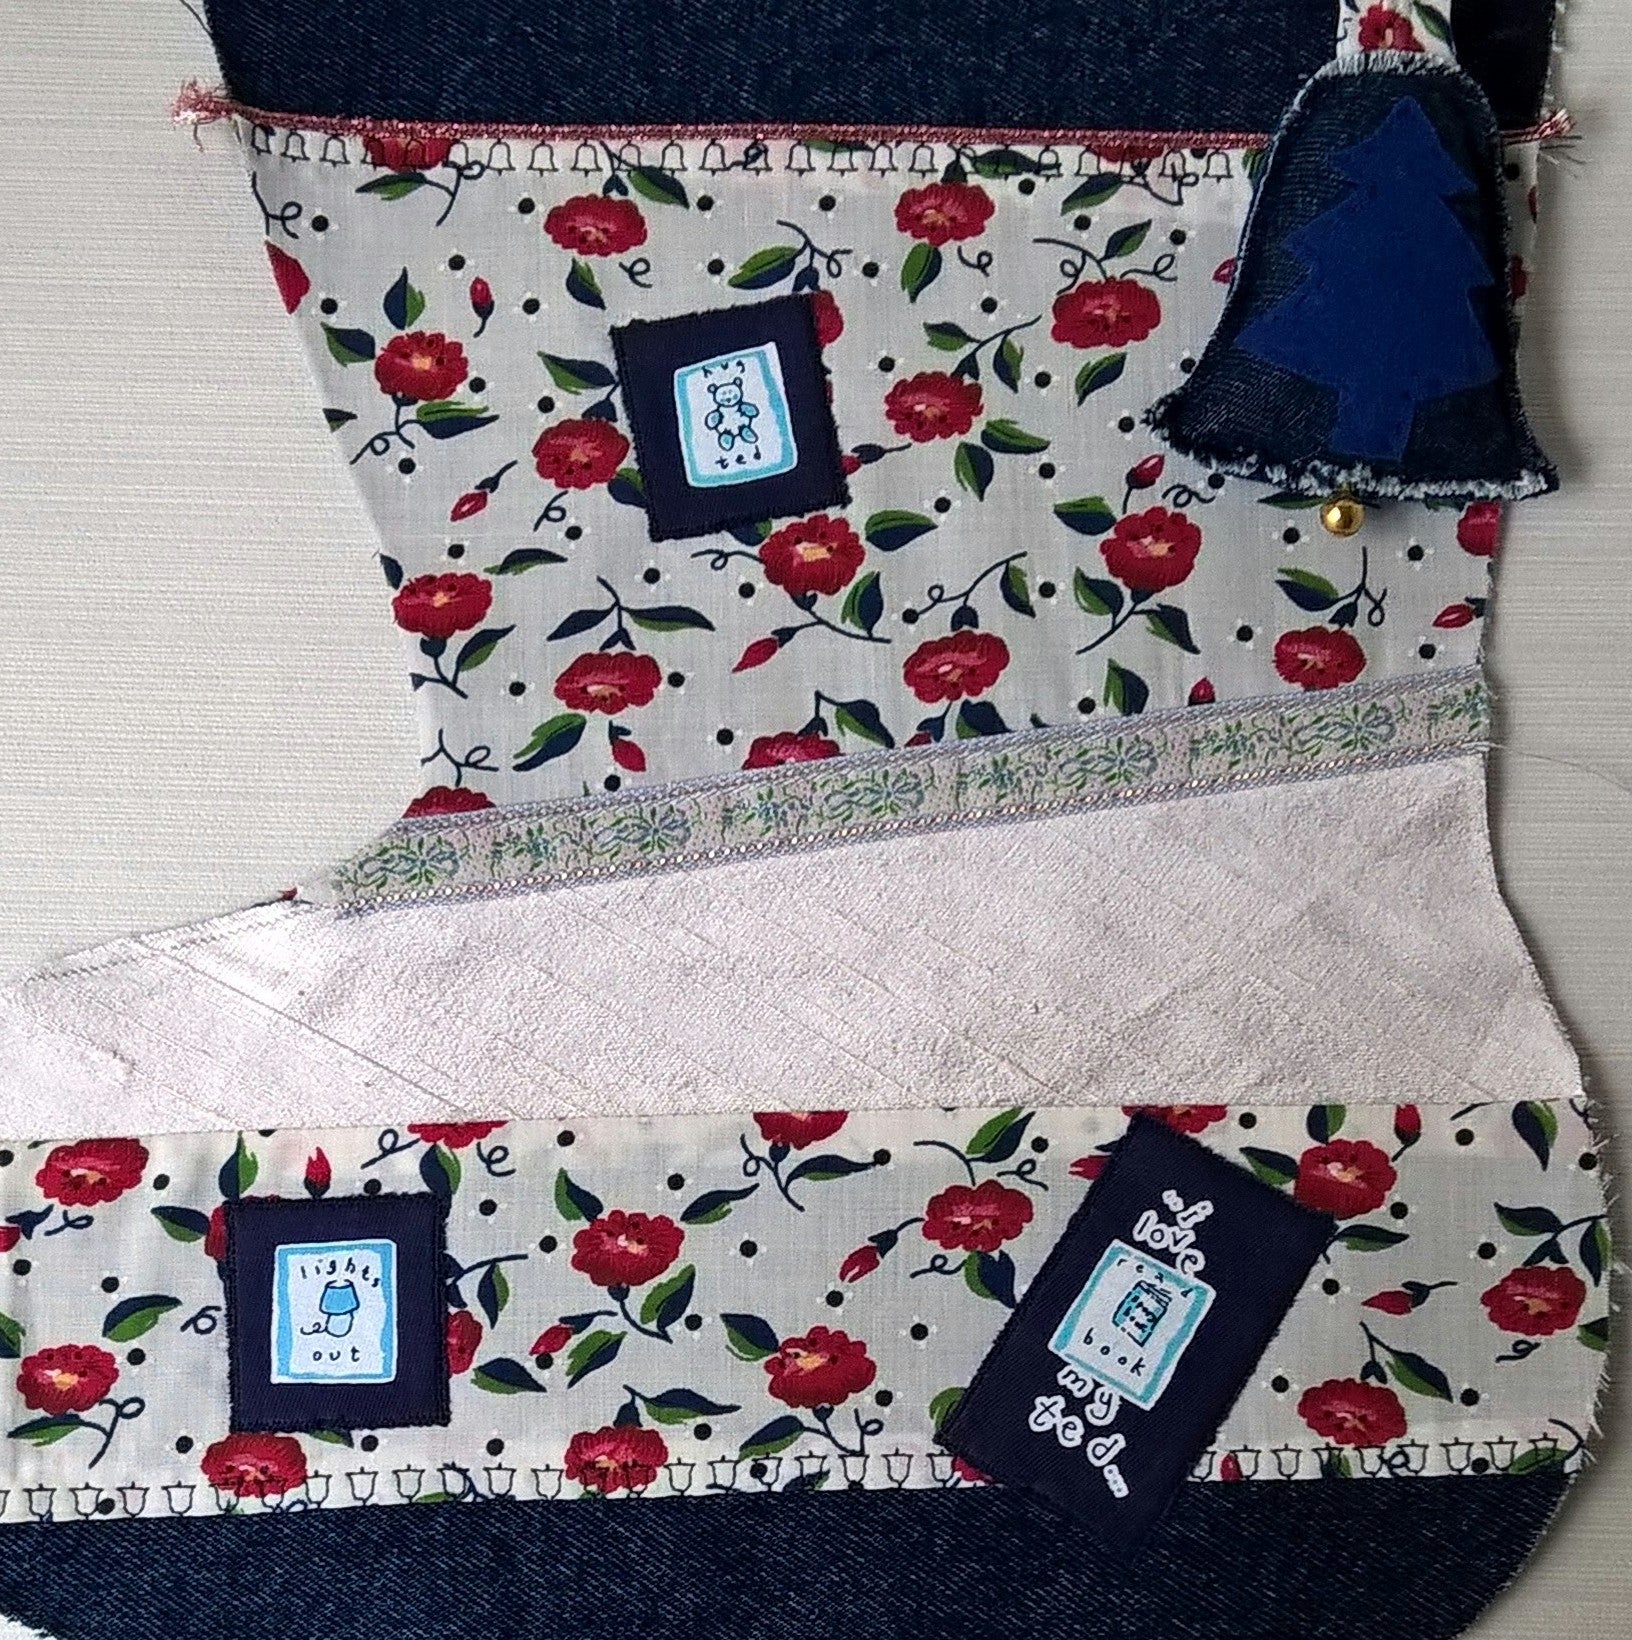 Indigo Christmas stocking ready to be embroidered with personalised name